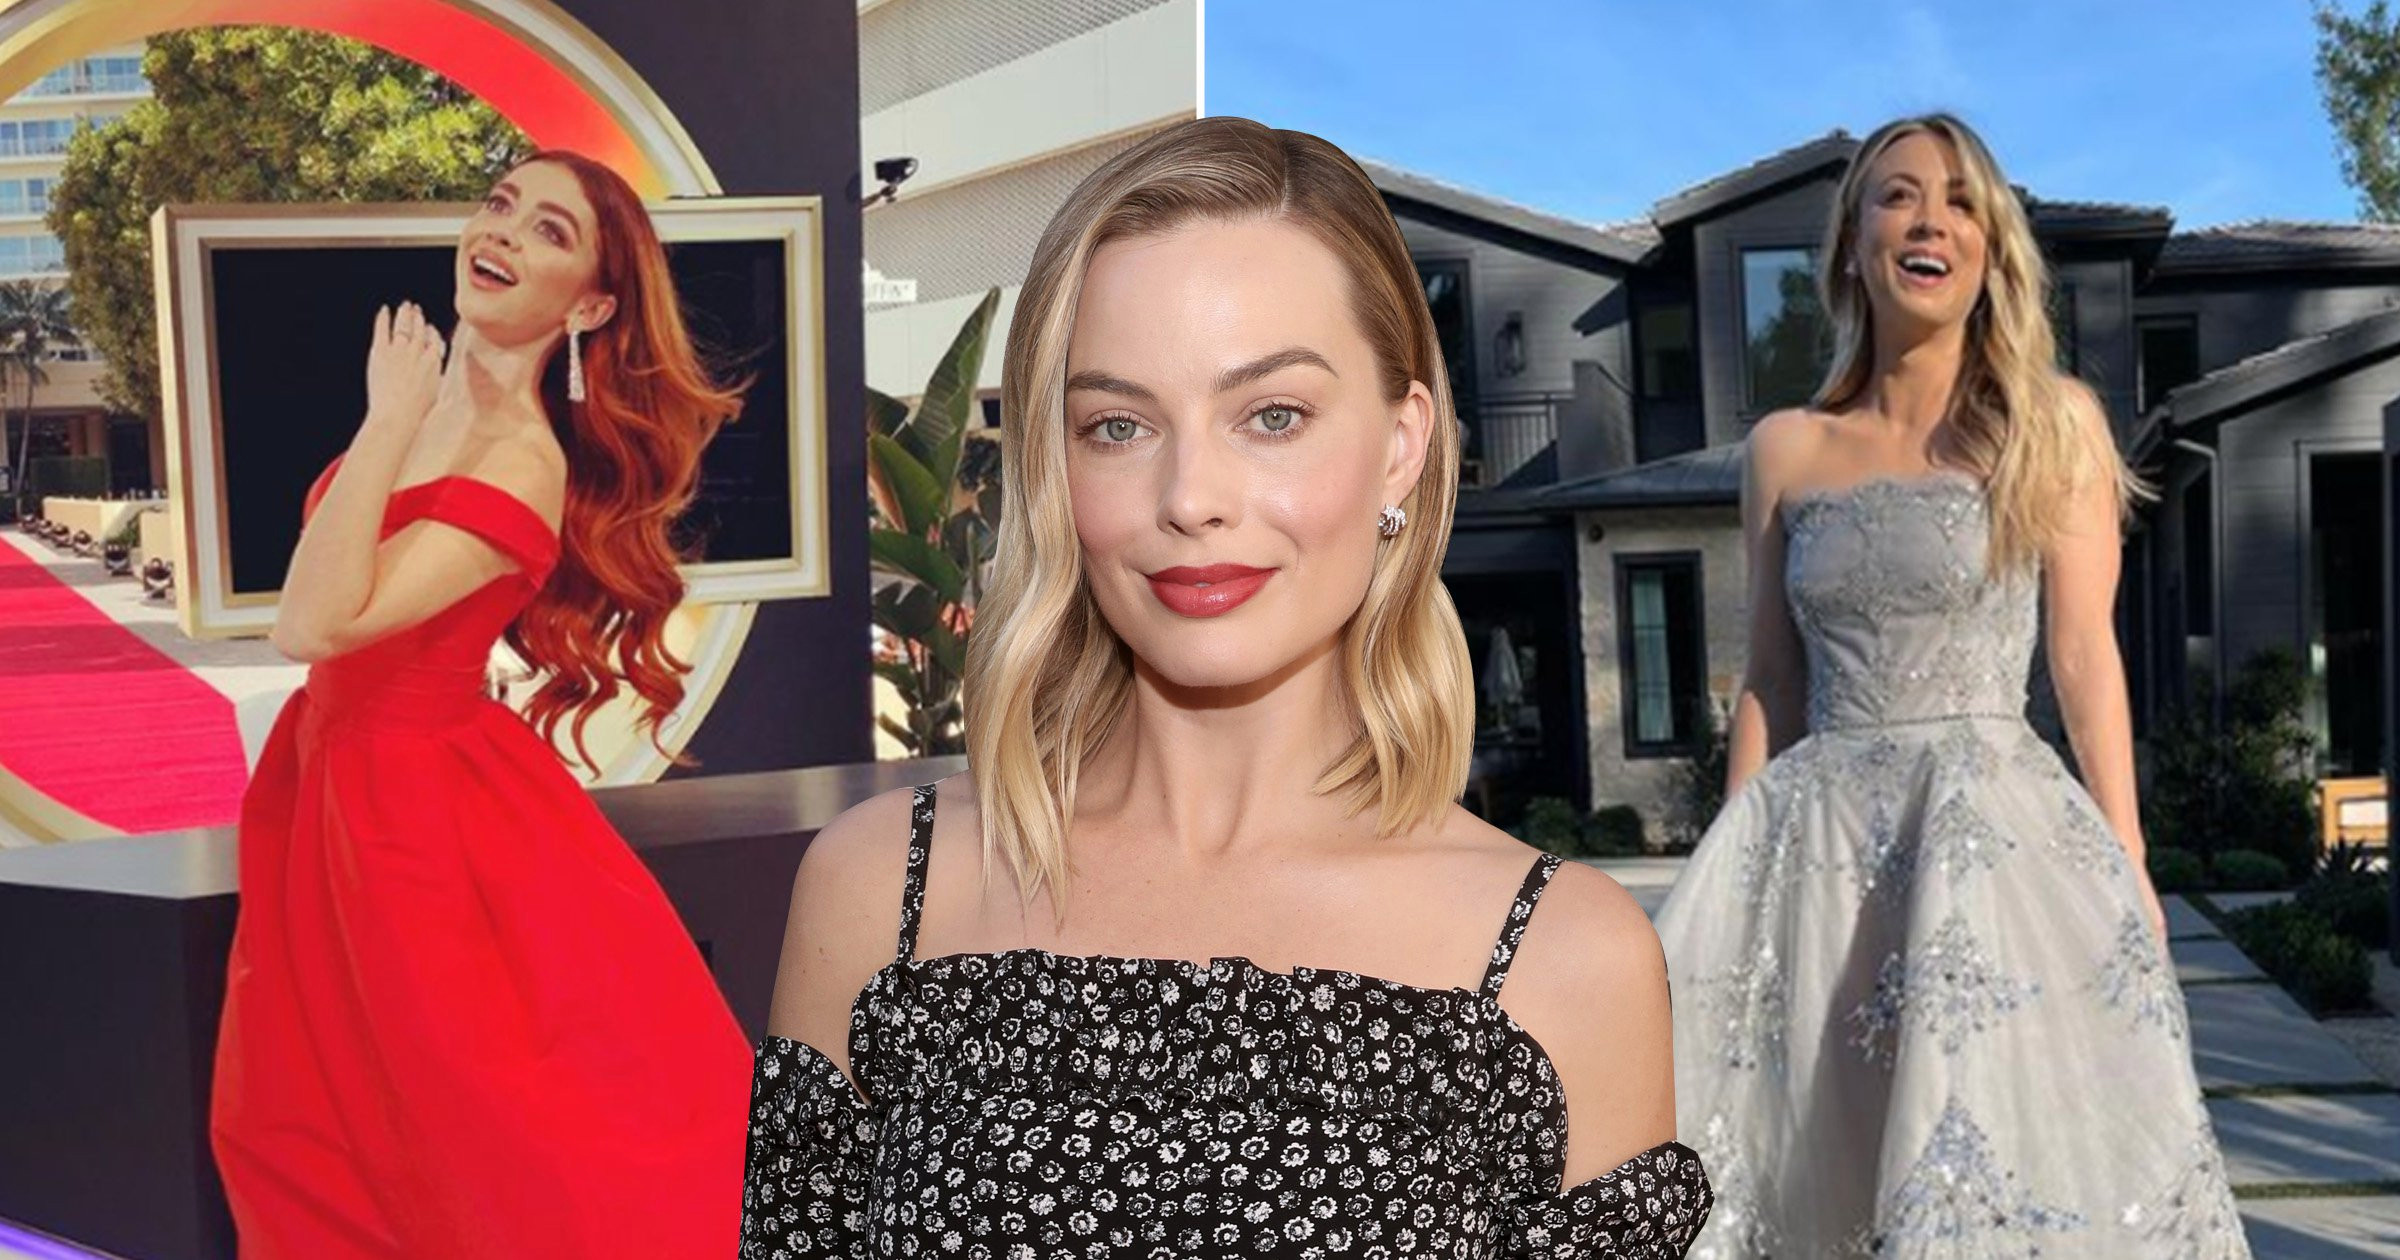 Golden Globes 2021: Kaley Cuoco and Margot Robbie lead the glamour for virtual red carpet